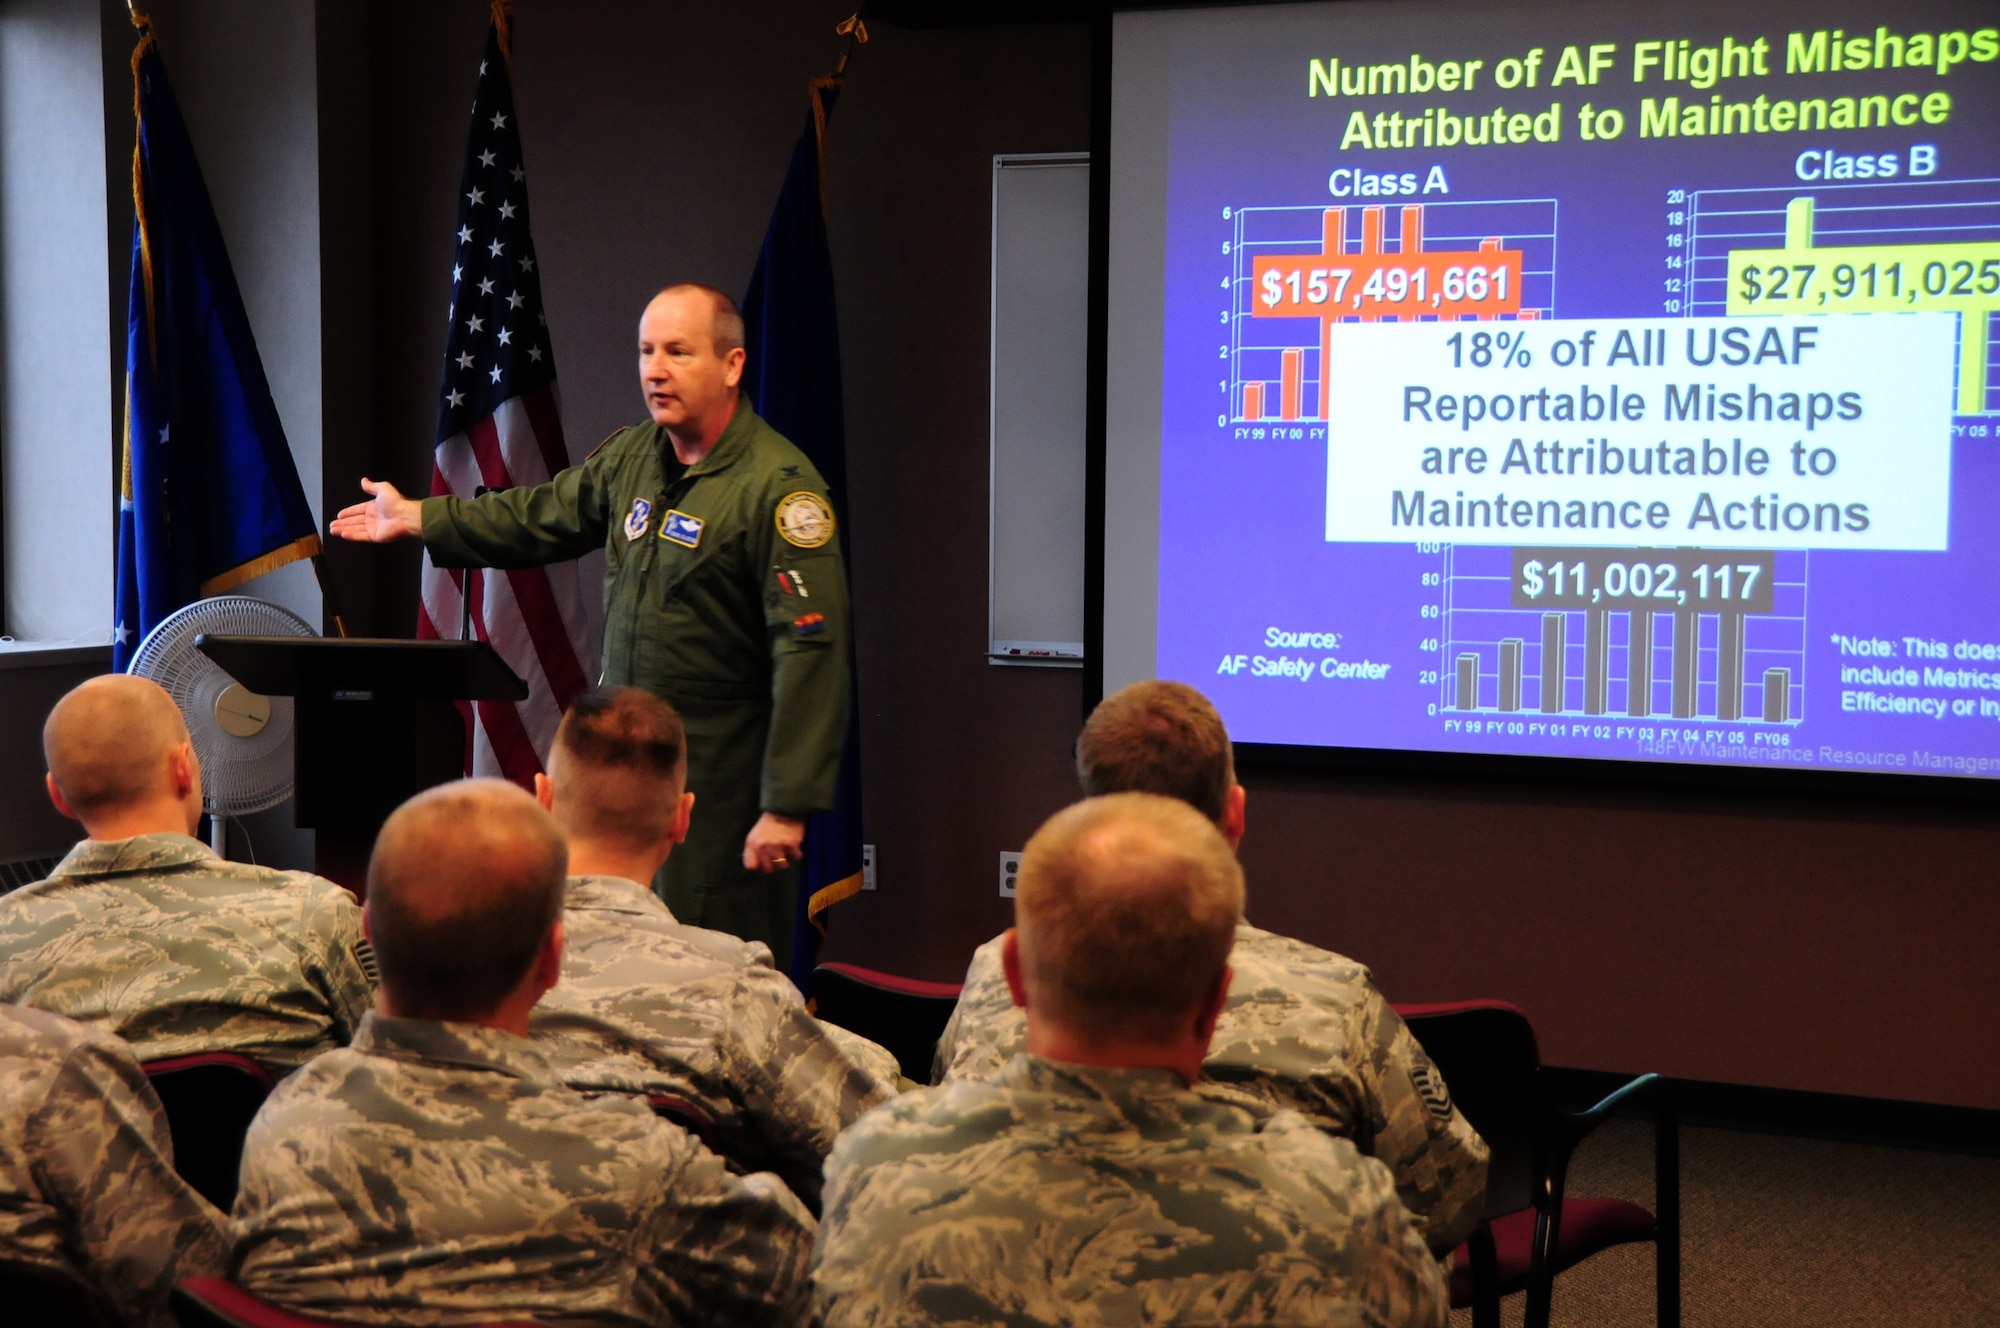 U.S. Air Force Col. John Slocum, the Air National Guard?s safety director, discusses the Maintenance Resource Management (MRM) program and Wingman concepts with Airmen from the 148th Fighter Wing at the Duluth, Minn., Air National Guard base June 12, 2010. MRM training was presented to maintence personnel in conjuction with a base wide "Wingman Stand-down."  (U.S. Air Force Photo by Master Sgt. Jason W. Rolfe)